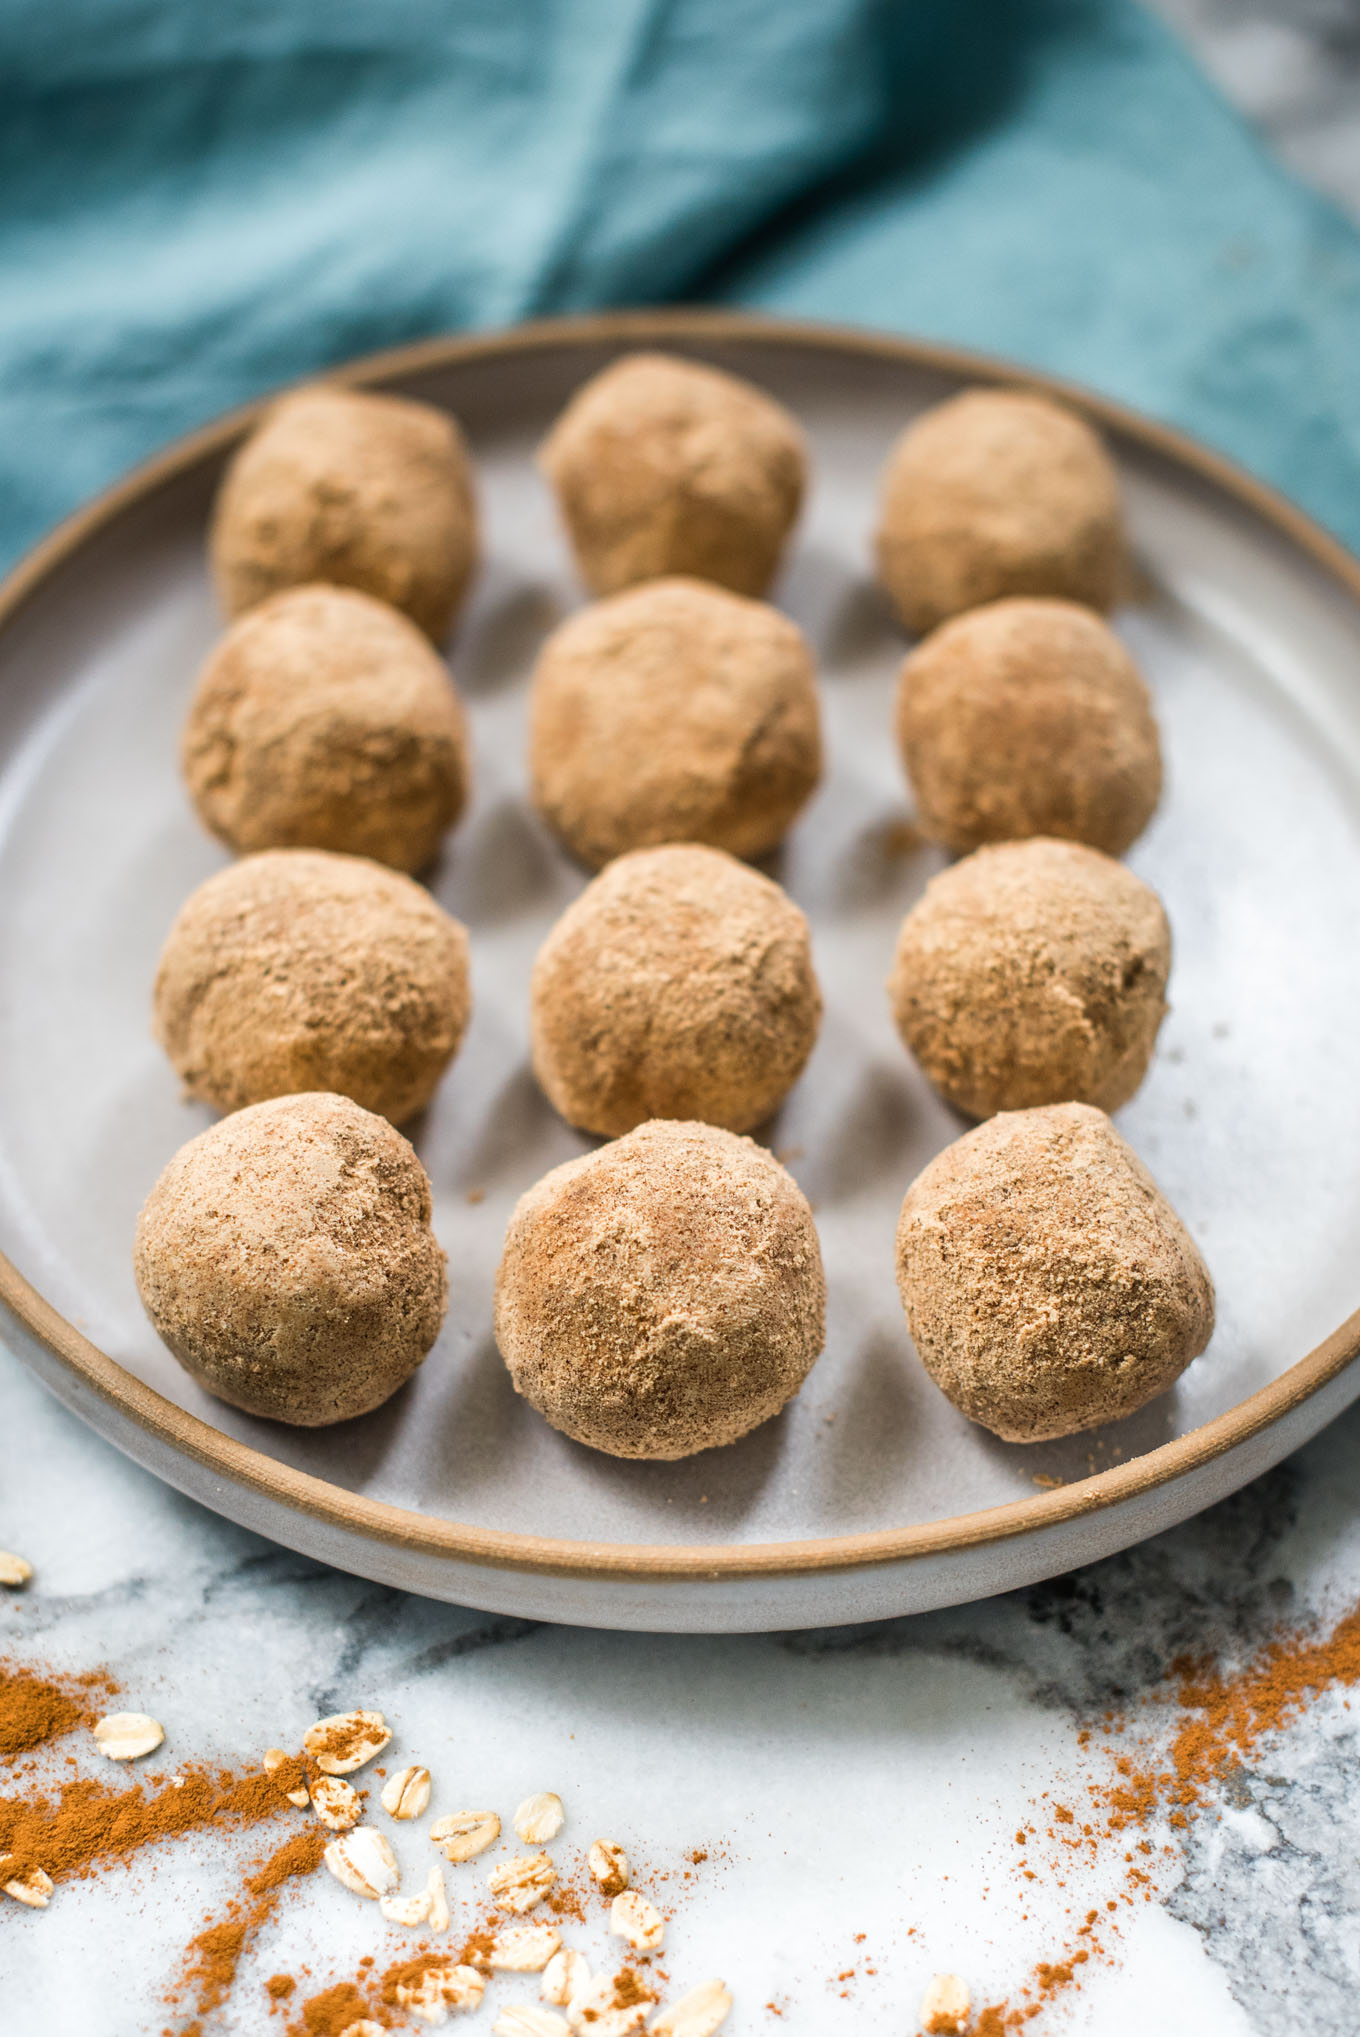 Peanut Butter Oat Balls + KitchenAid Mixer Giveaway! - Yummy Healthy Easy